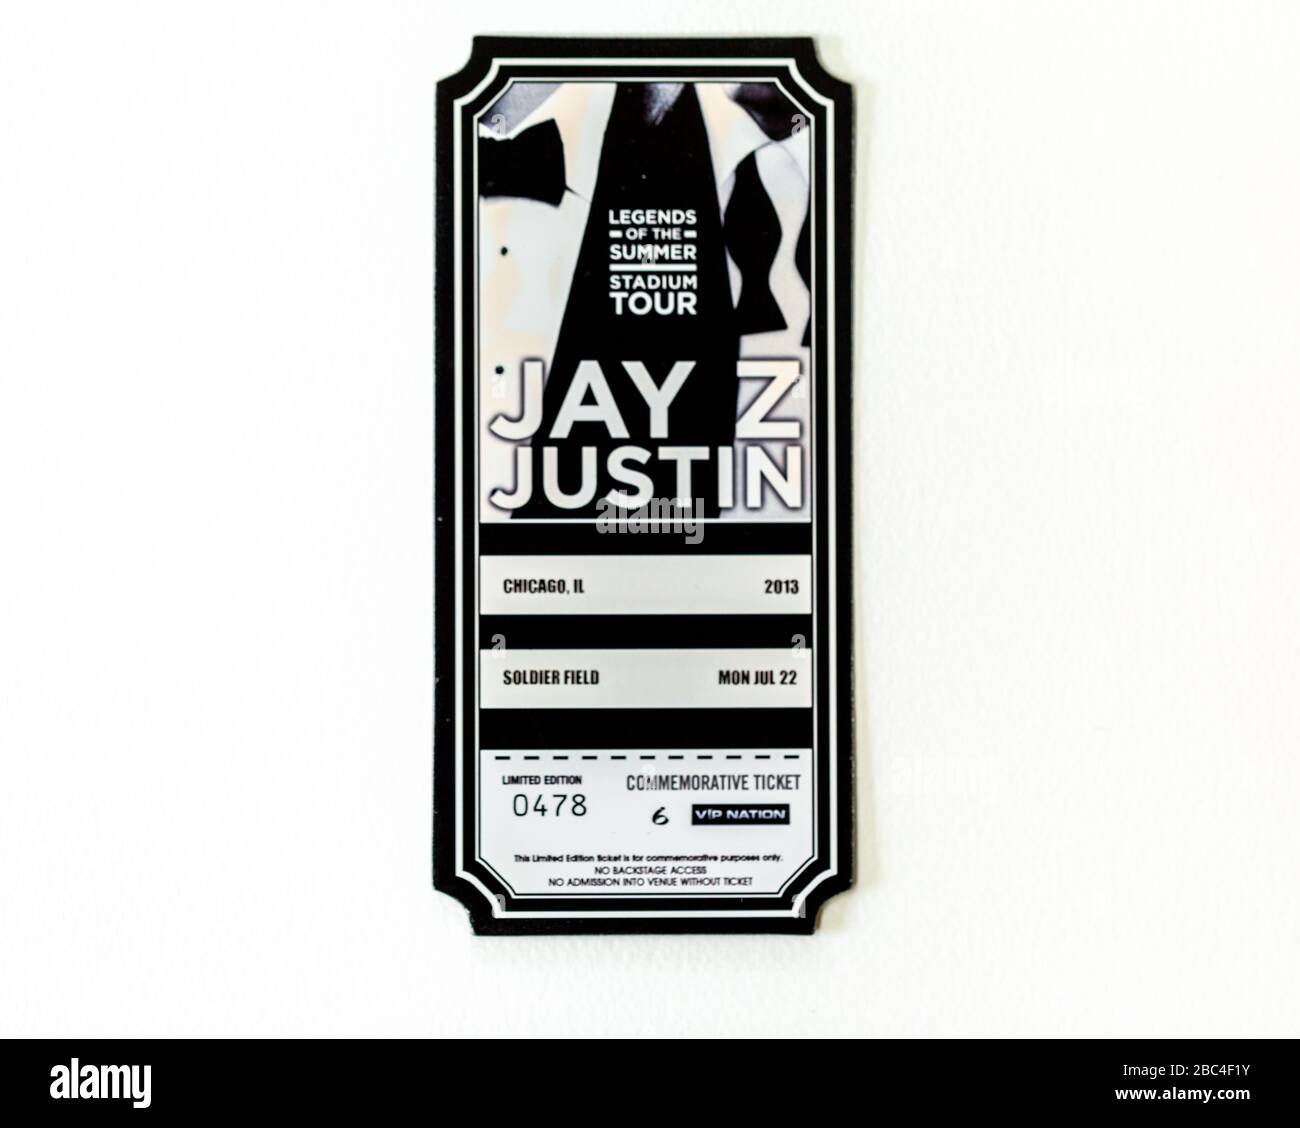 Legends of the Summer Stadium Tour, Jay Z and Justin Timberlake VIP ticket Stock Photo